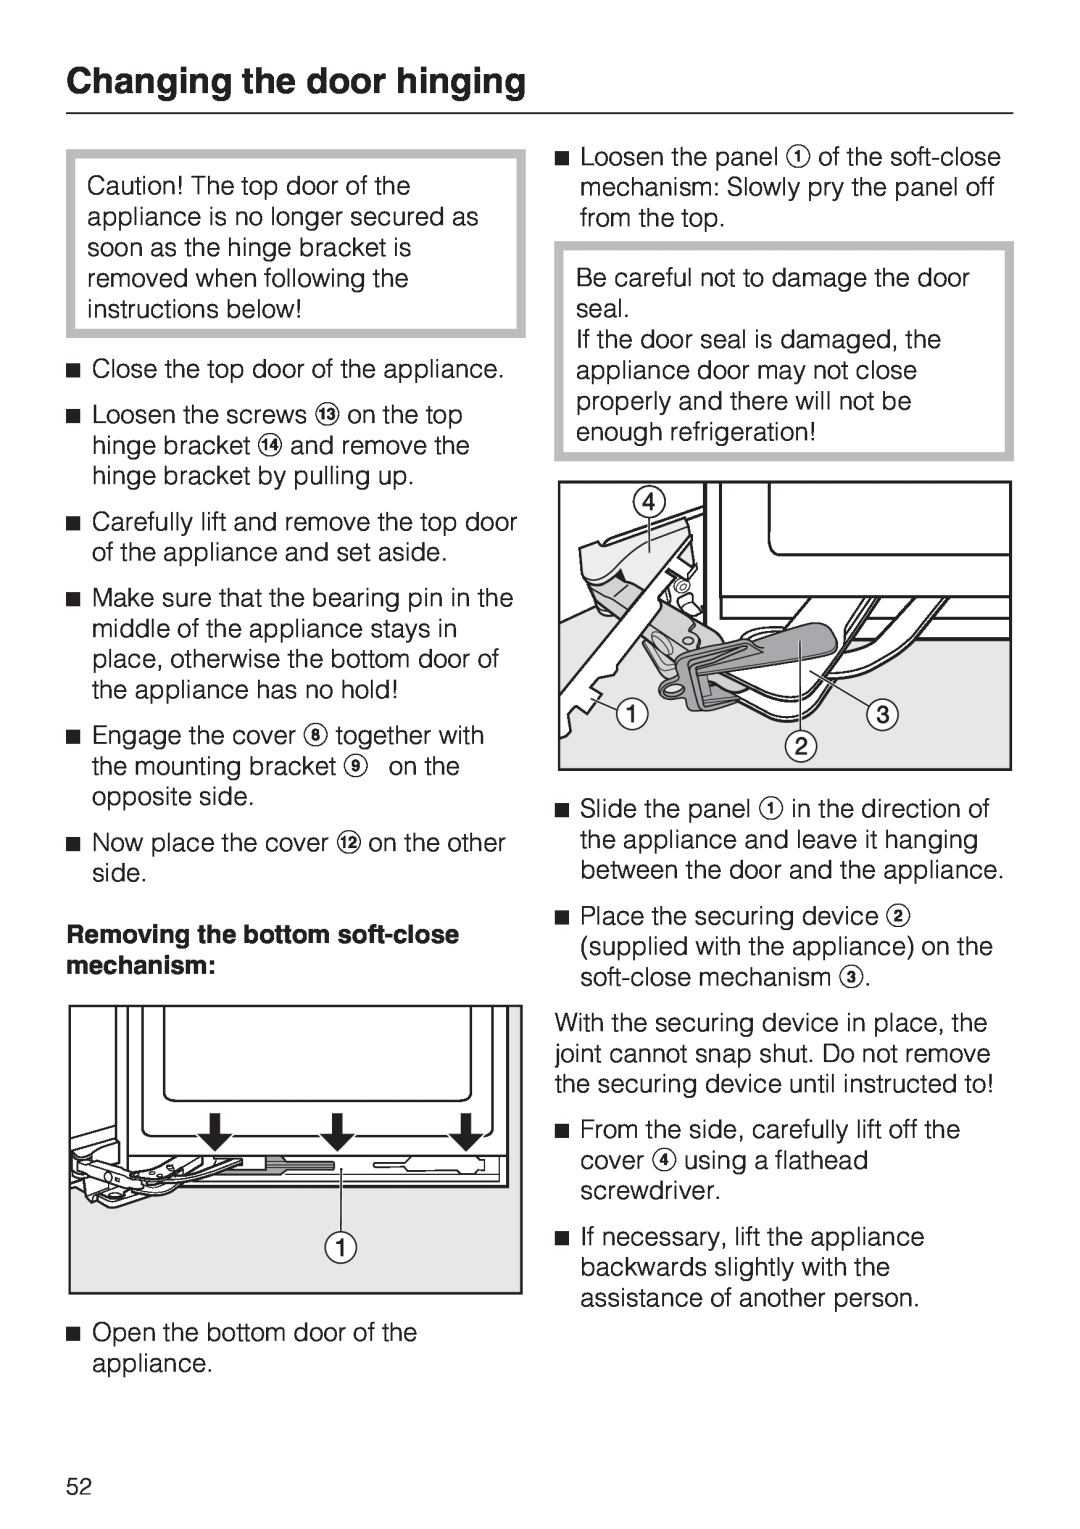 Miele KFN 14943 SD ED installation instructions Removing the bottom soft-closemechanism, Changing the door hinging 